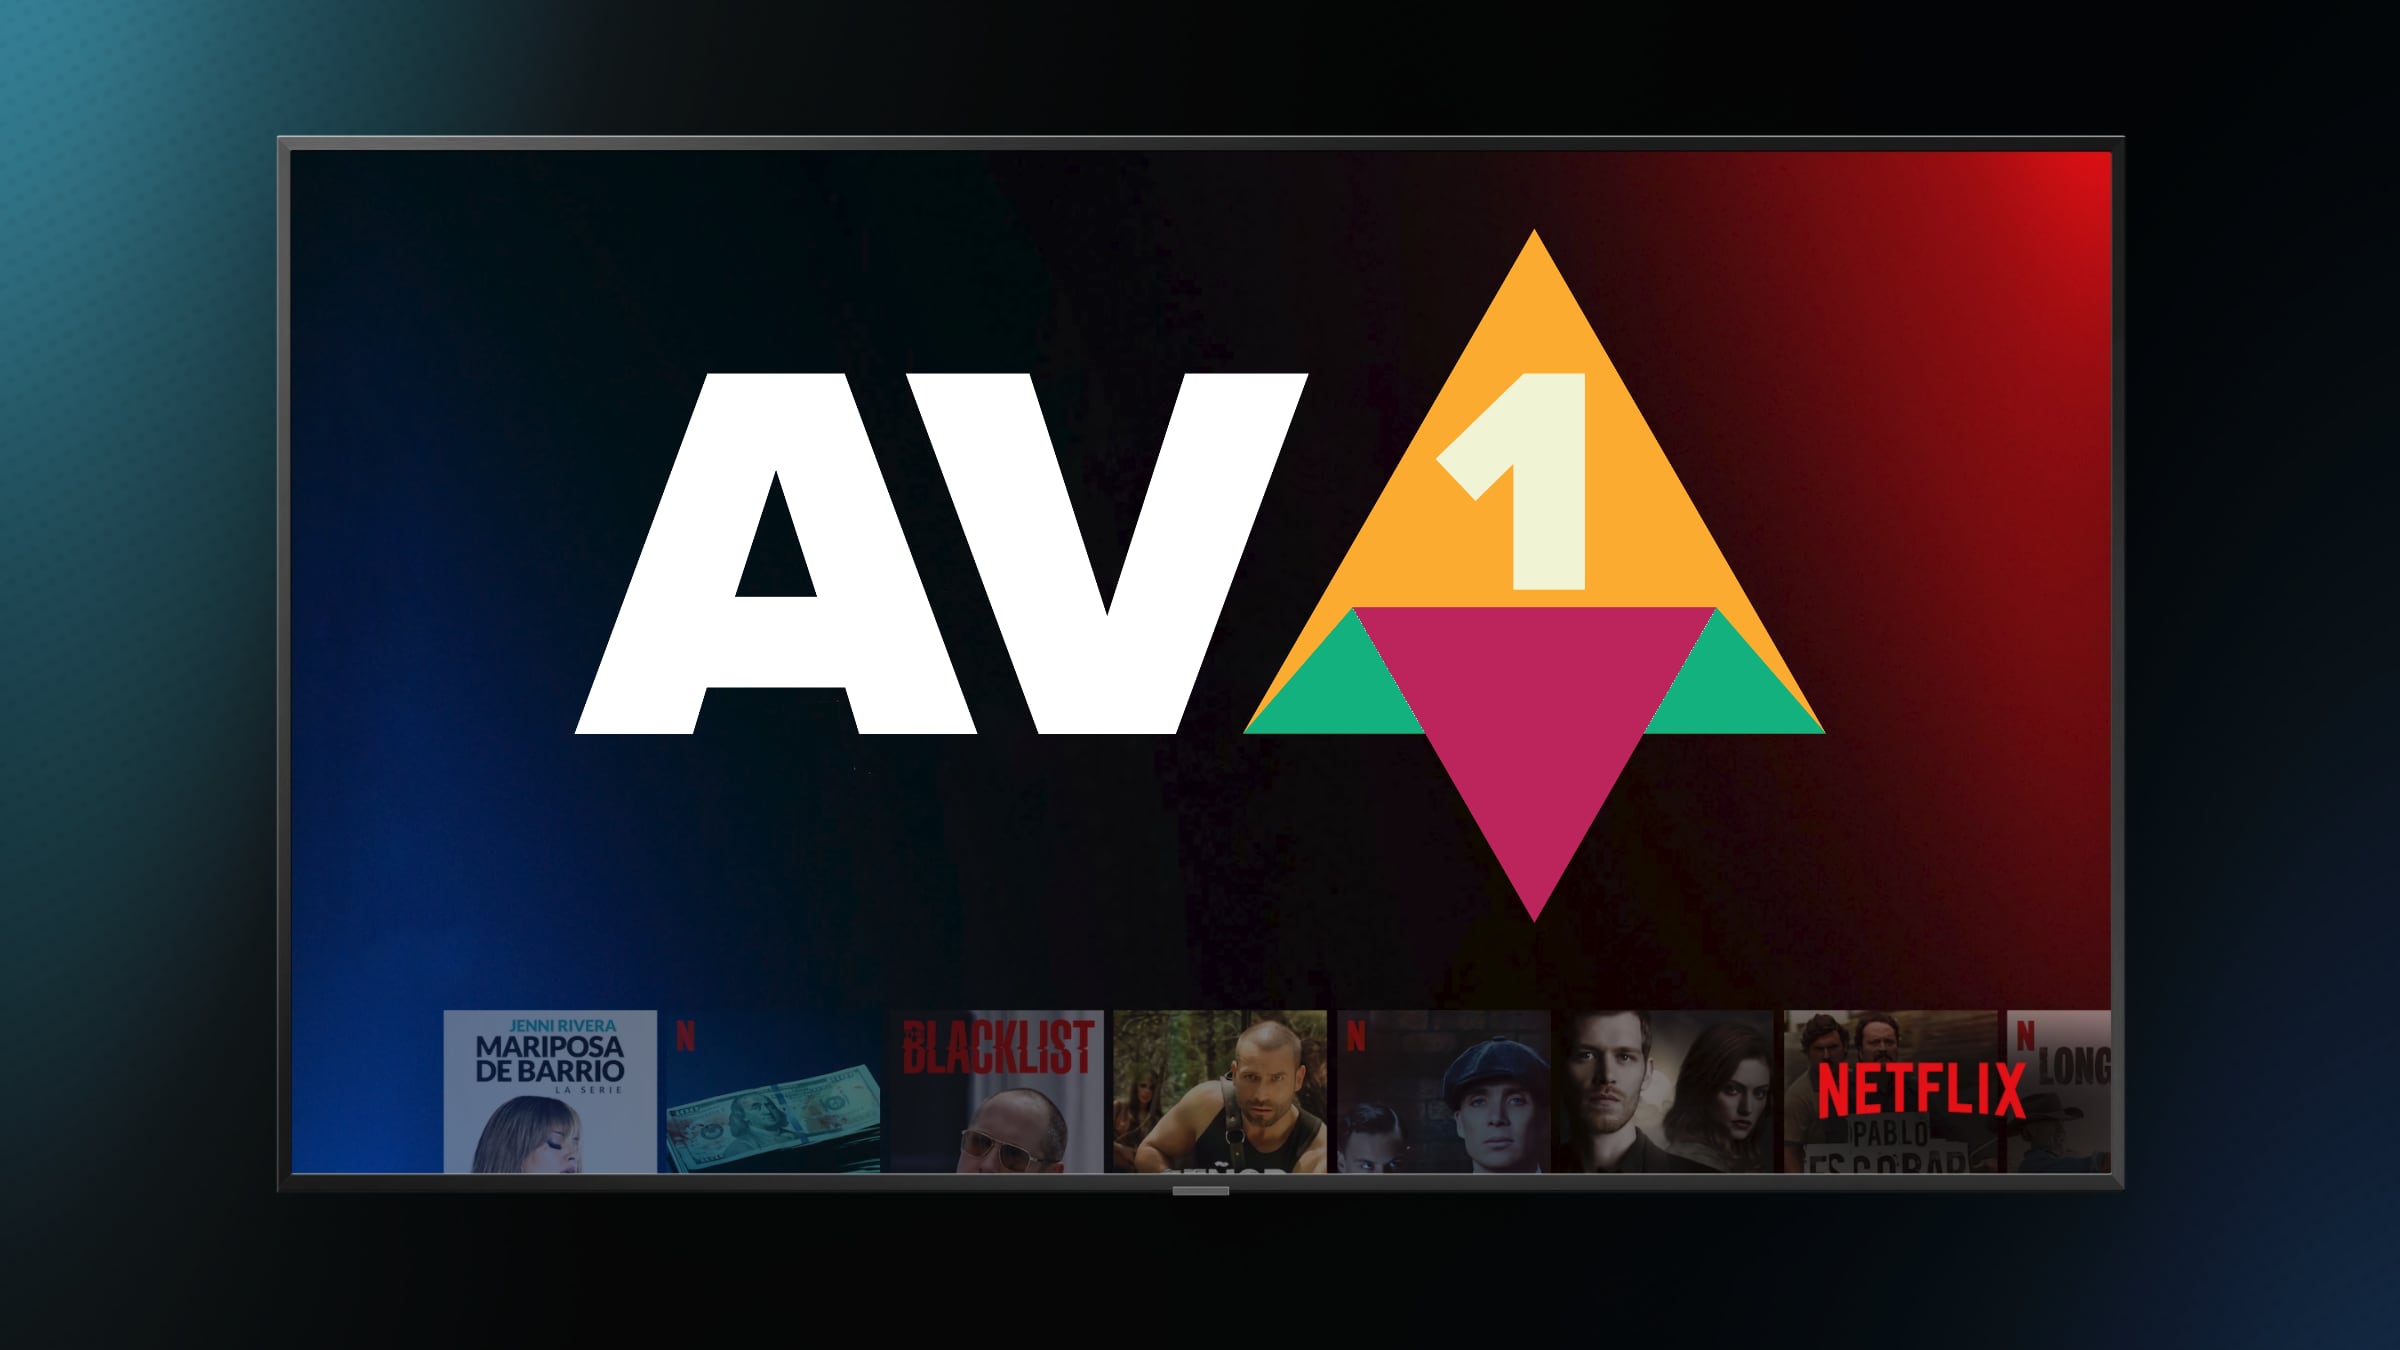 Netflix is now streaming AV1-encoded video to smart TVs and some OTT devices.